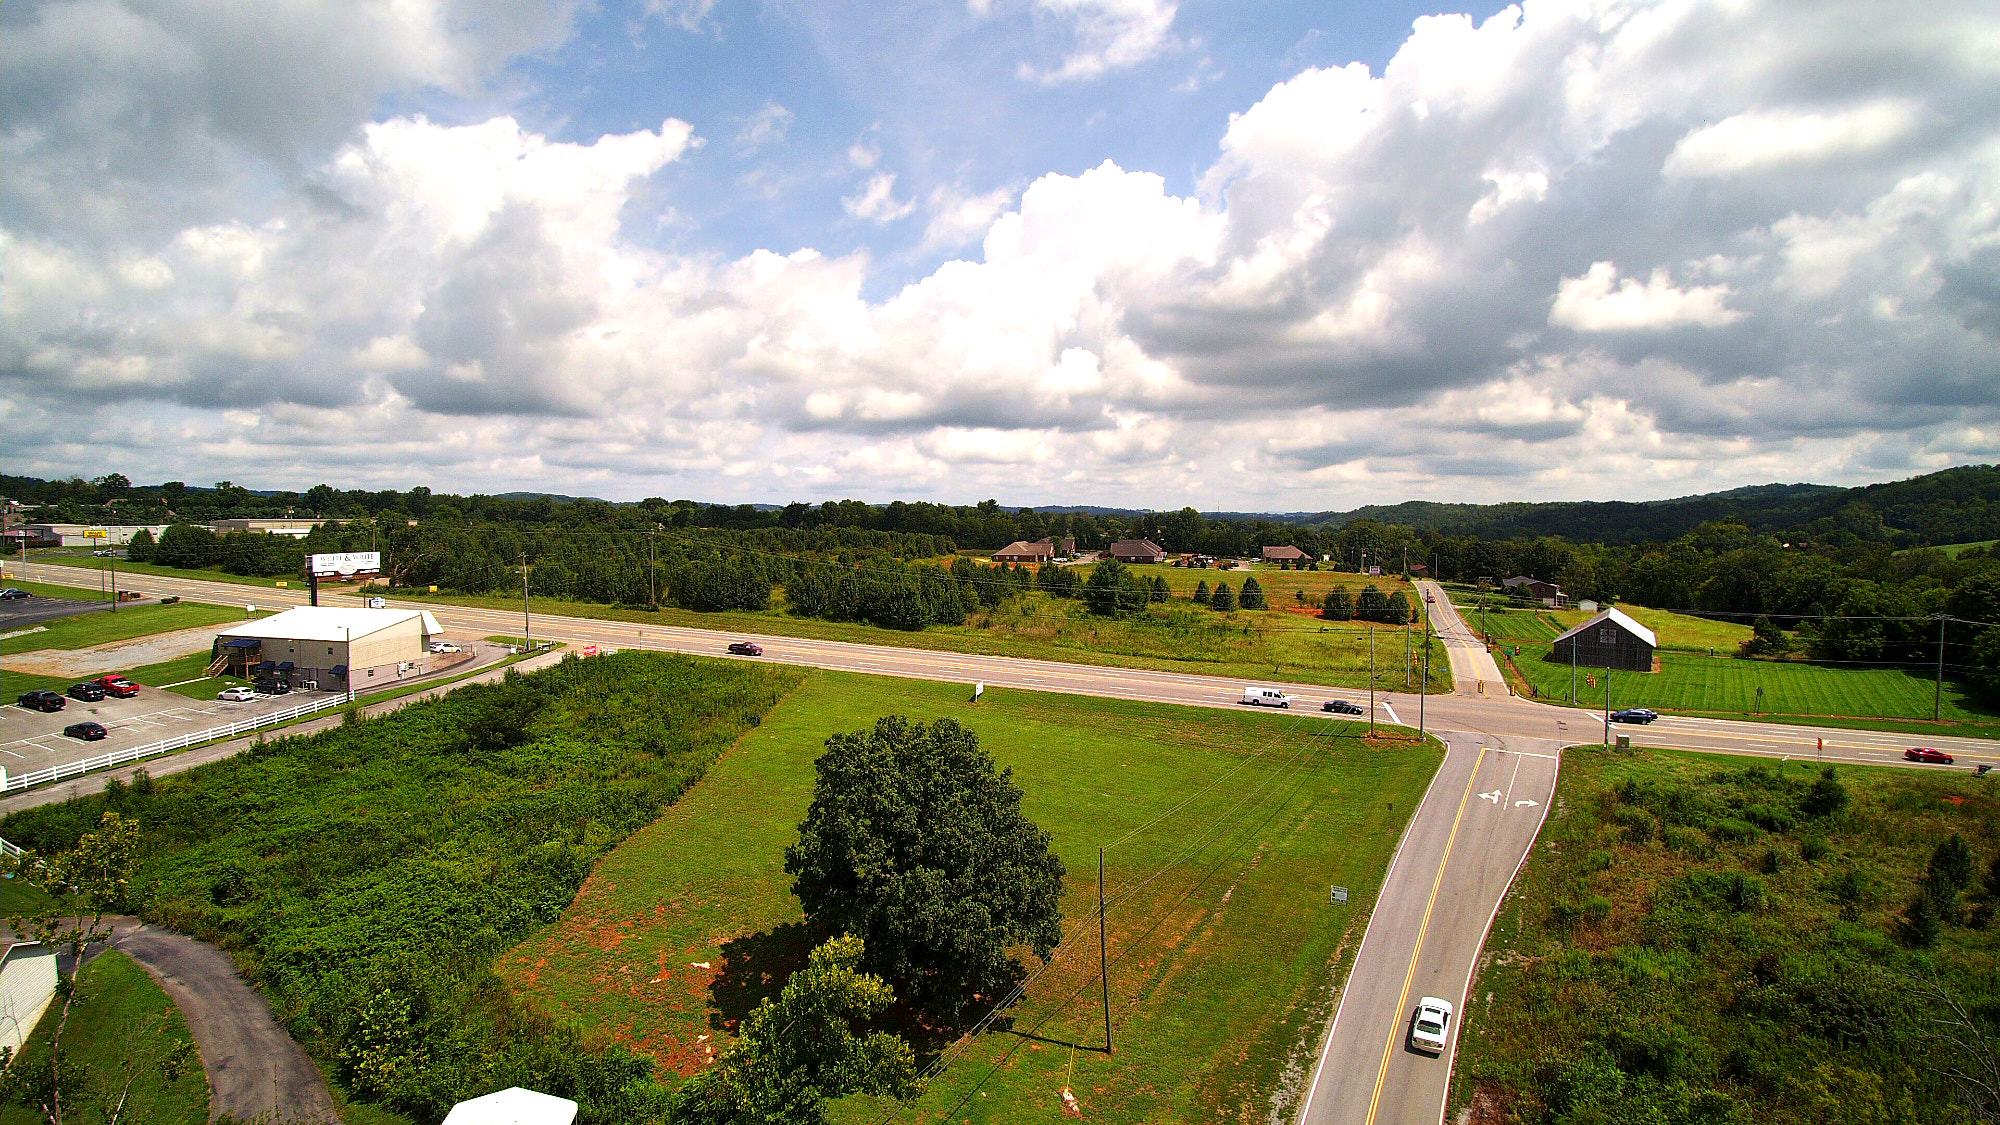 drone photography professional photographer inKnoxville, TN